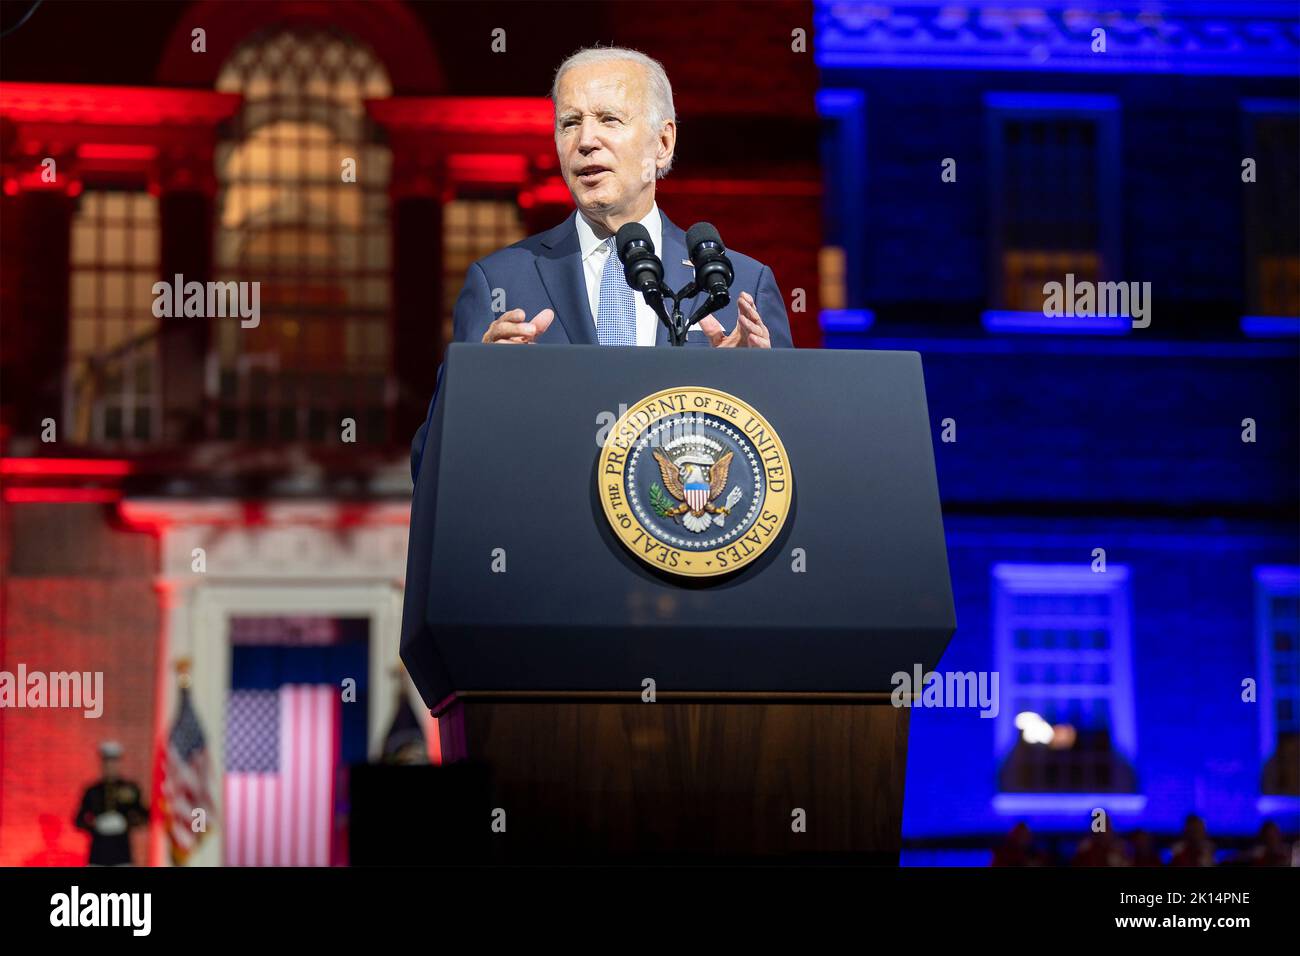 Philadelphia, United States of America. 01 September, 2022. U.S President Joe Biden, delivers a prime time address on threats to democracy to the American people outside historic Independence Hall, September 1, 2022 in Philadelphia, Pennsylvania. Stock Photo